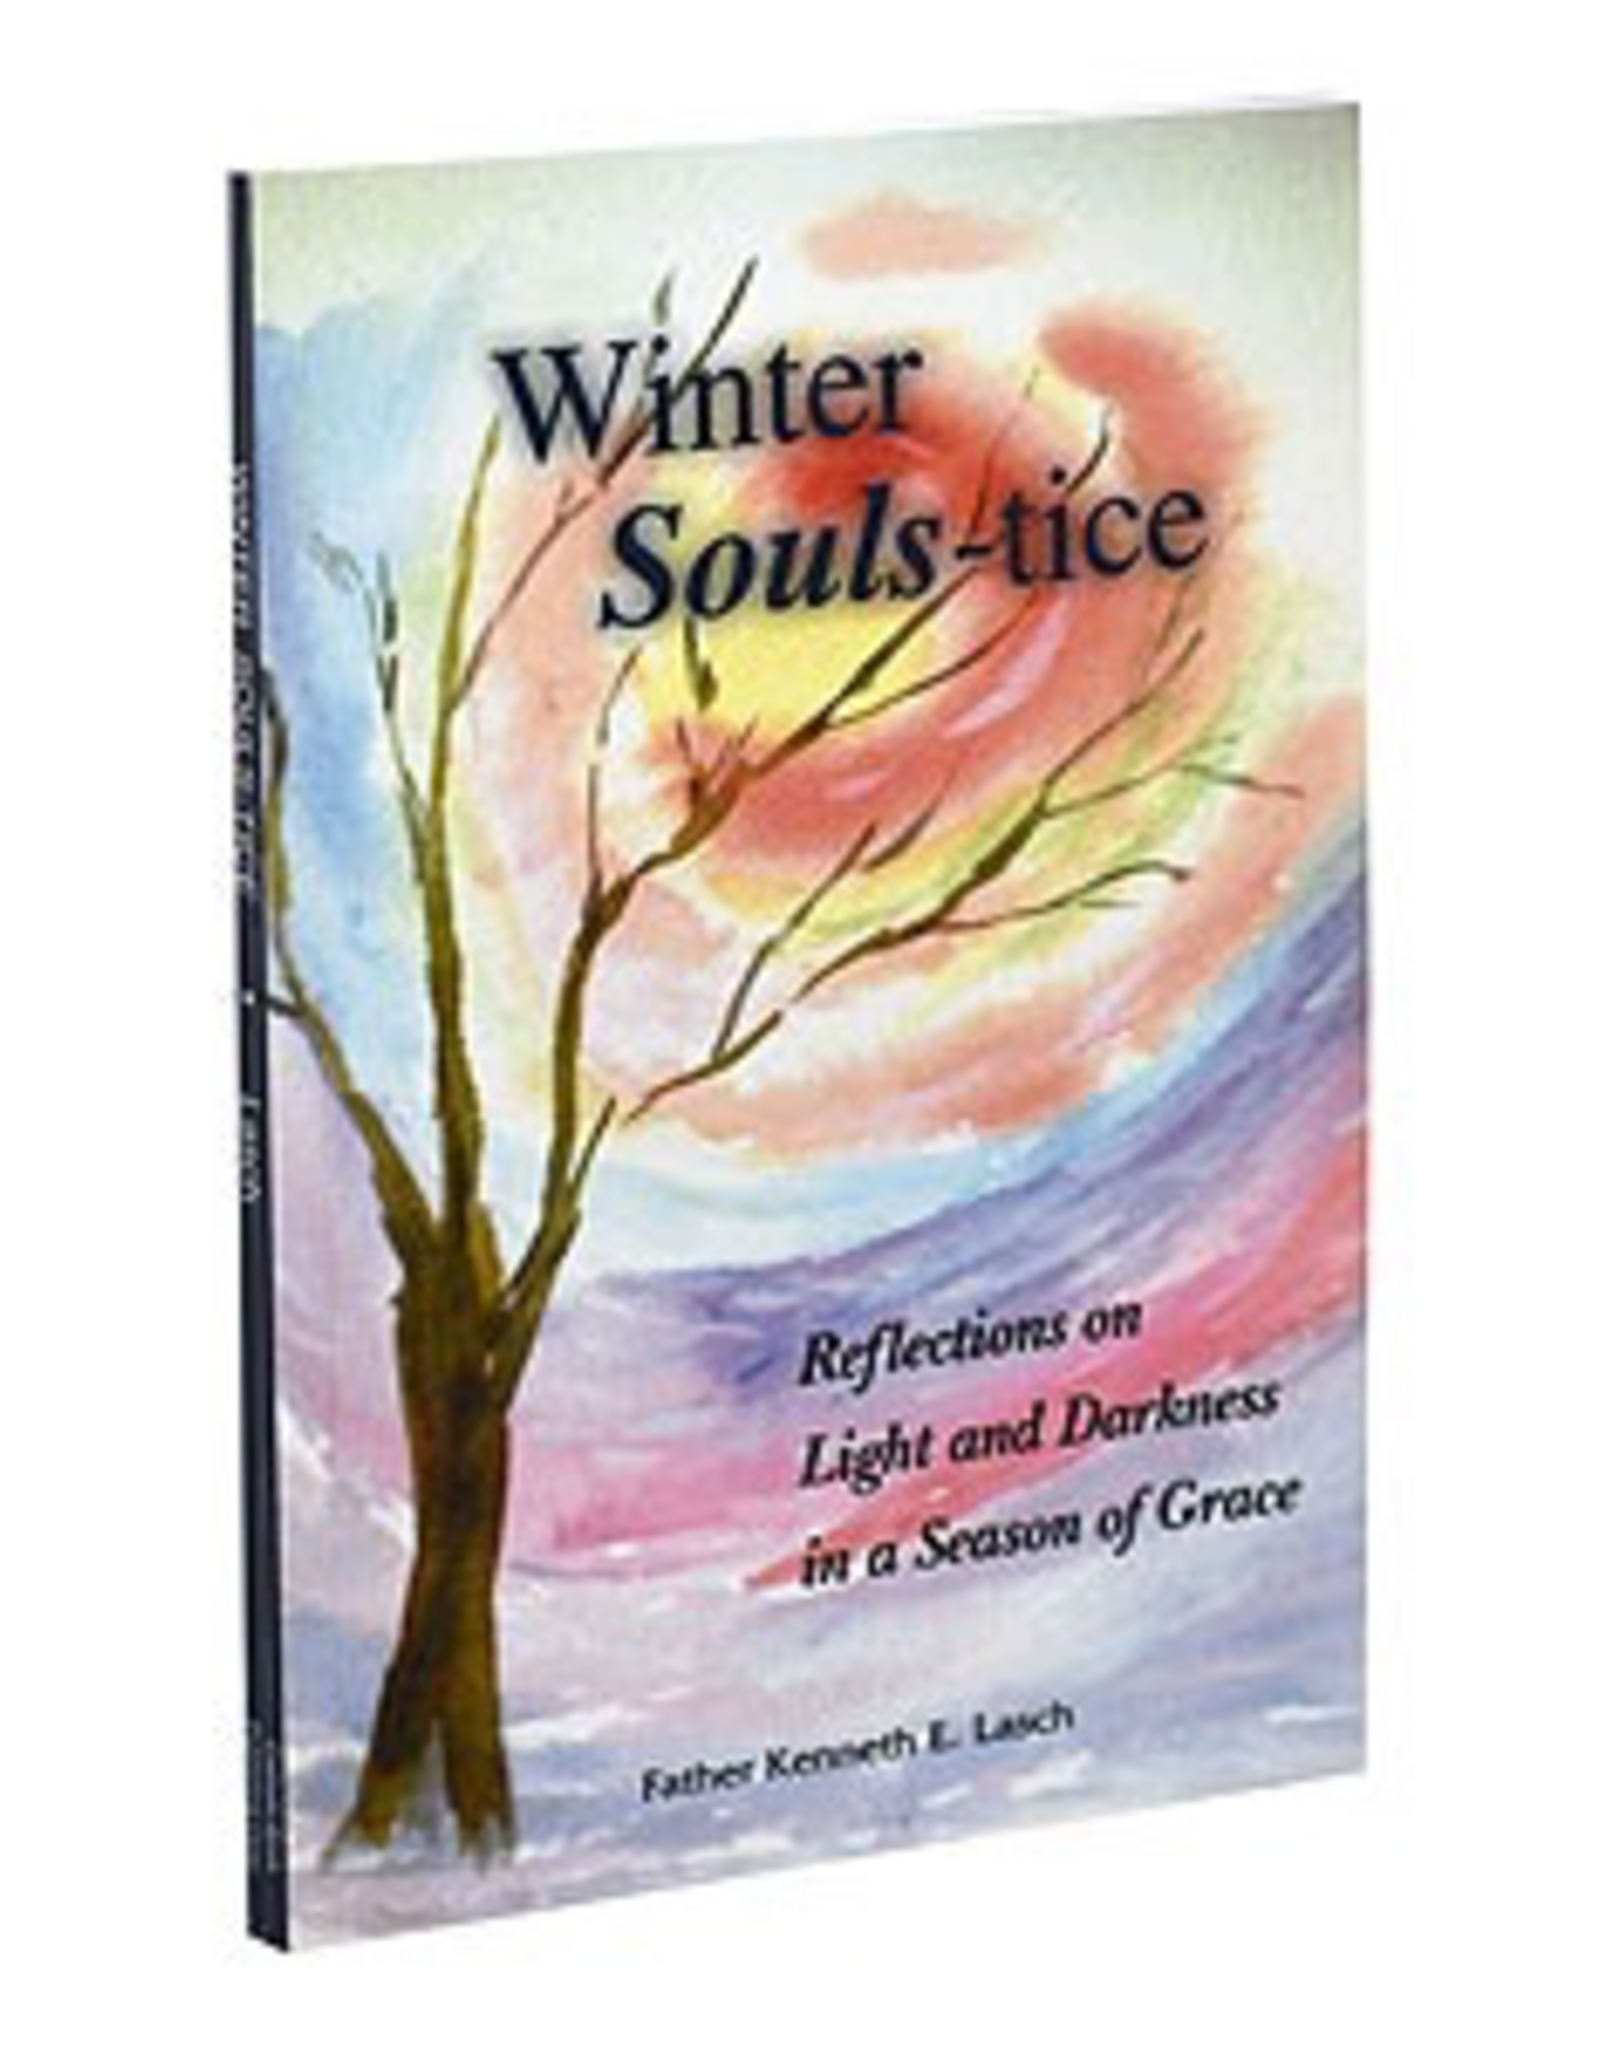 Catholic Book Publishing Winter Souls-tice: Reflections on Light and Darkness in  A Season of Grace, by Kenneth Lasch (paperback)